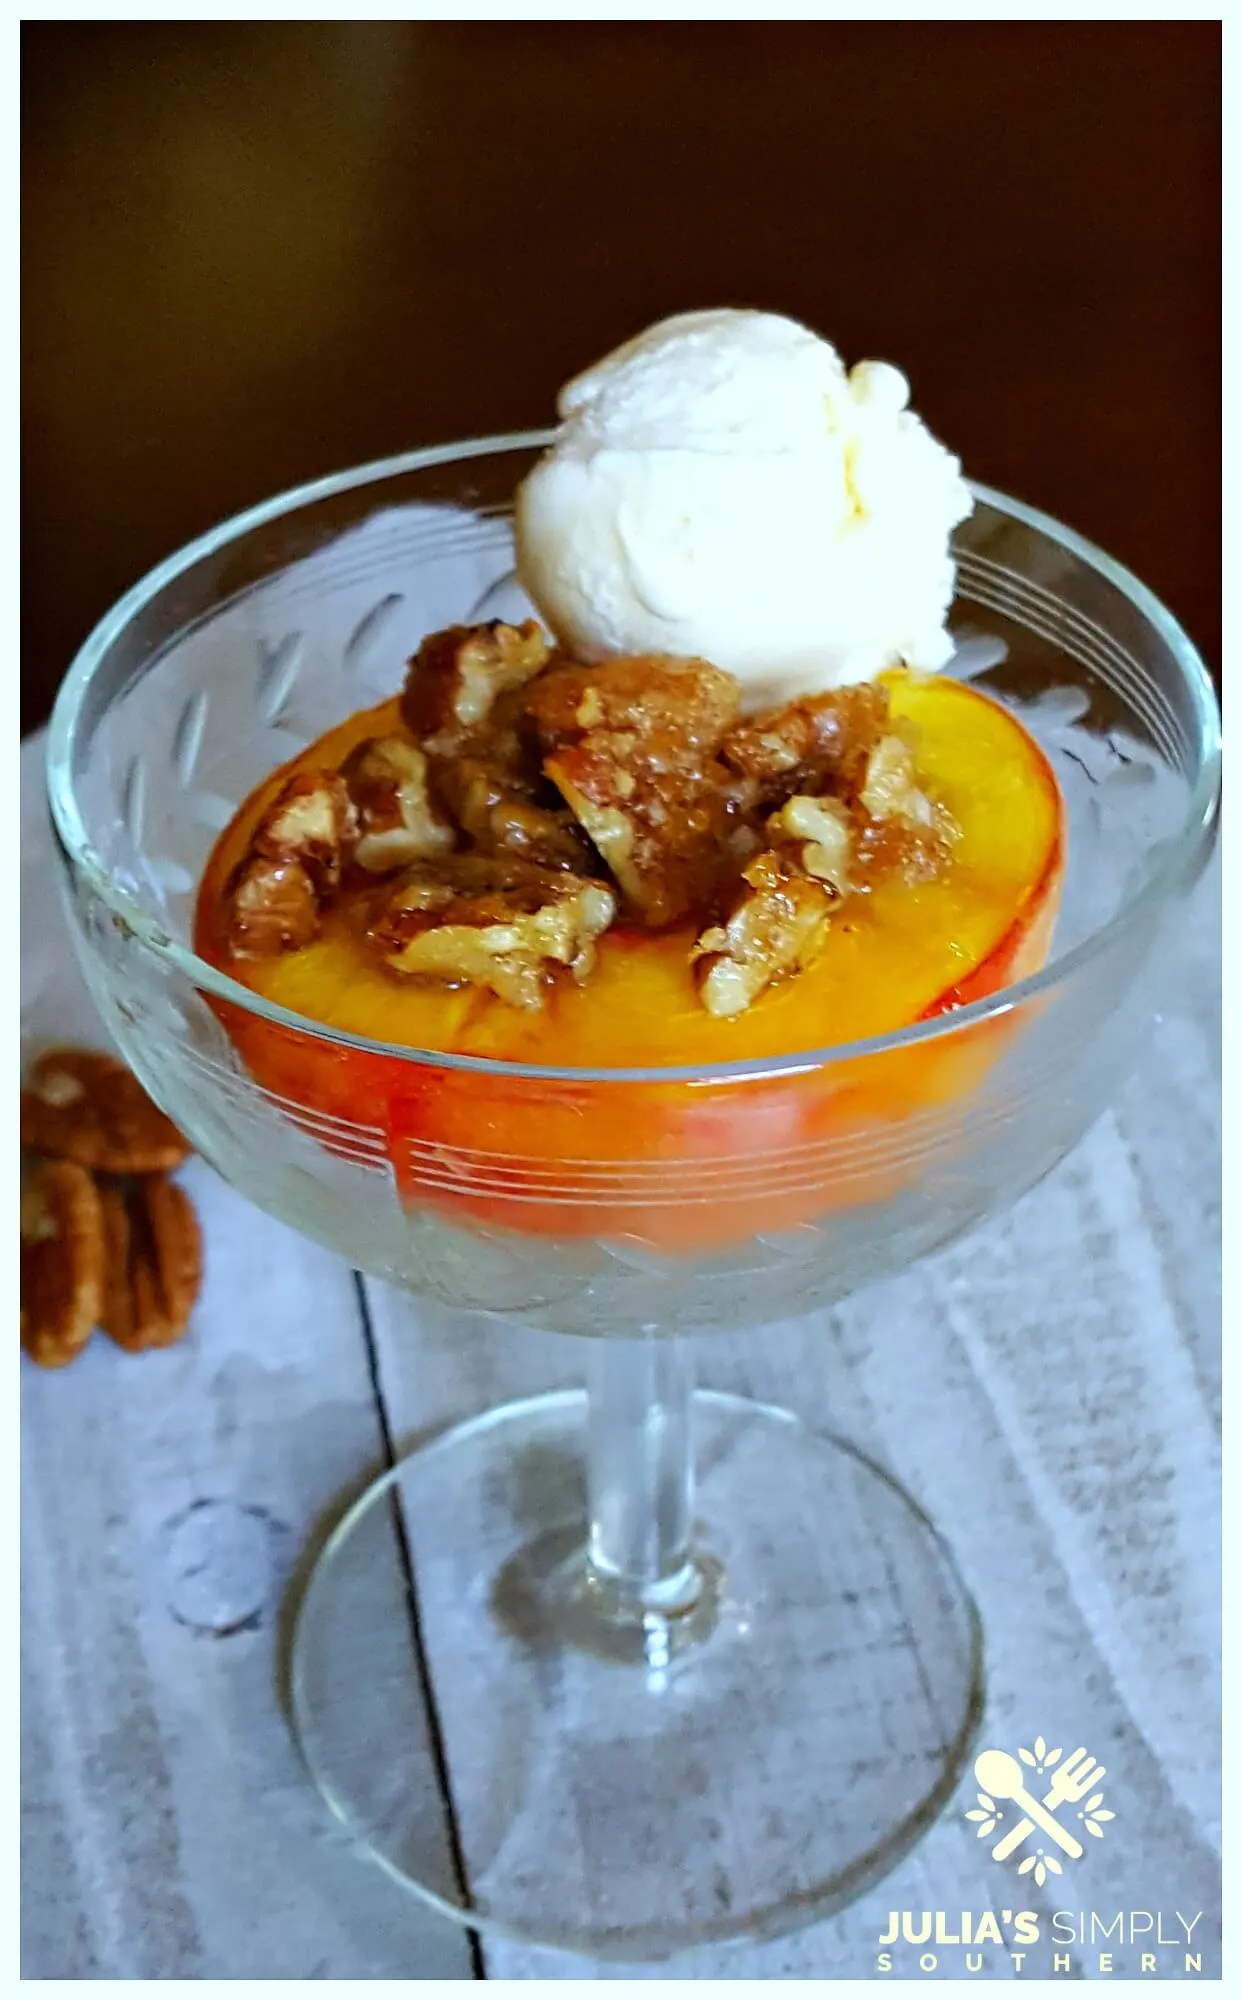 Delicious bourbon peach dessert baked in the oven 